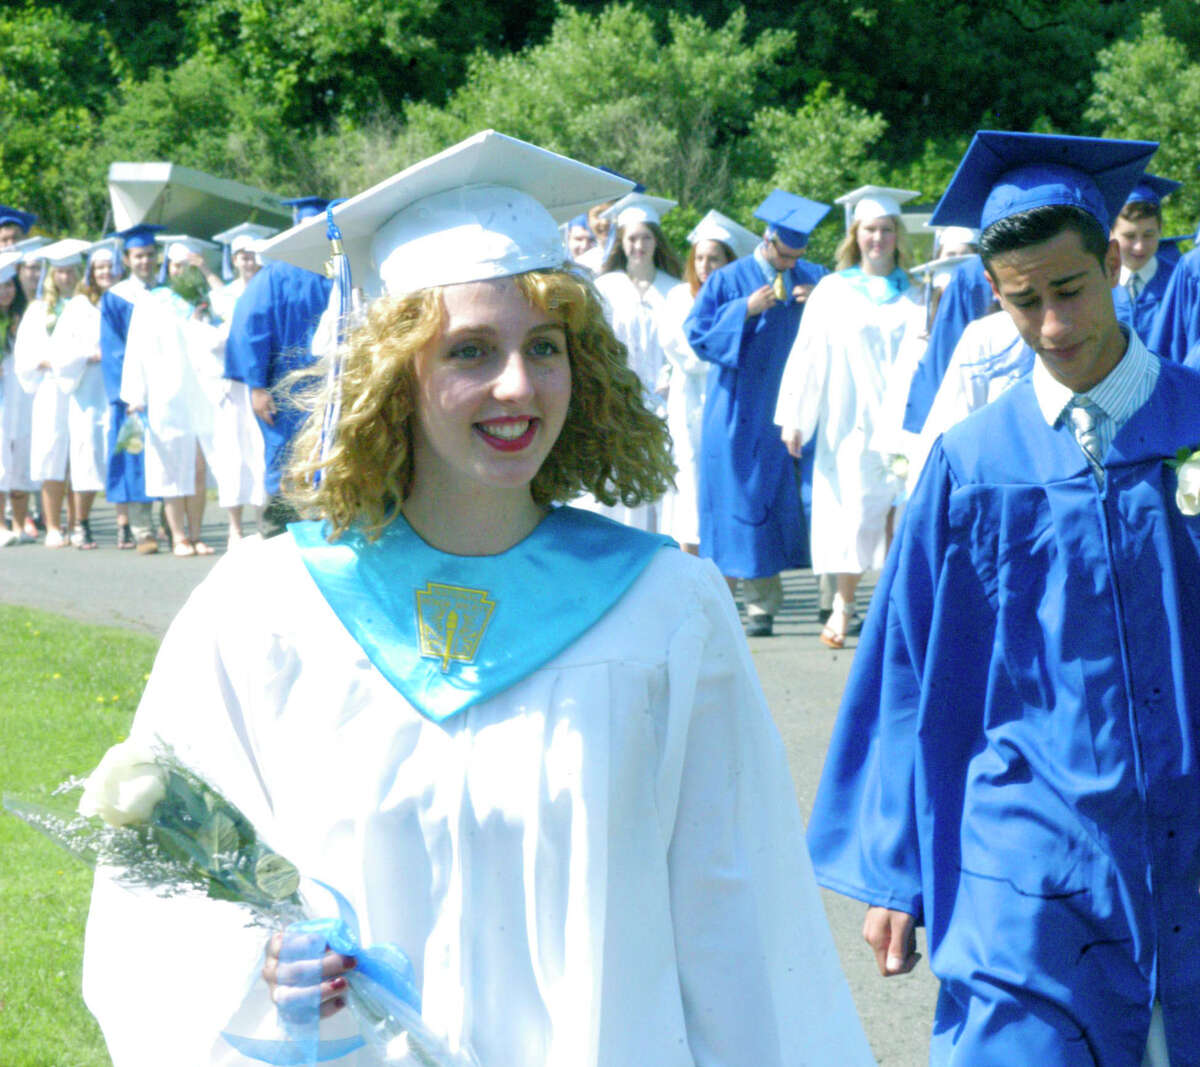 The processional for the Shepaug Valley High School graduation ceremony, June 14, 2014, on the school campus in Washington.